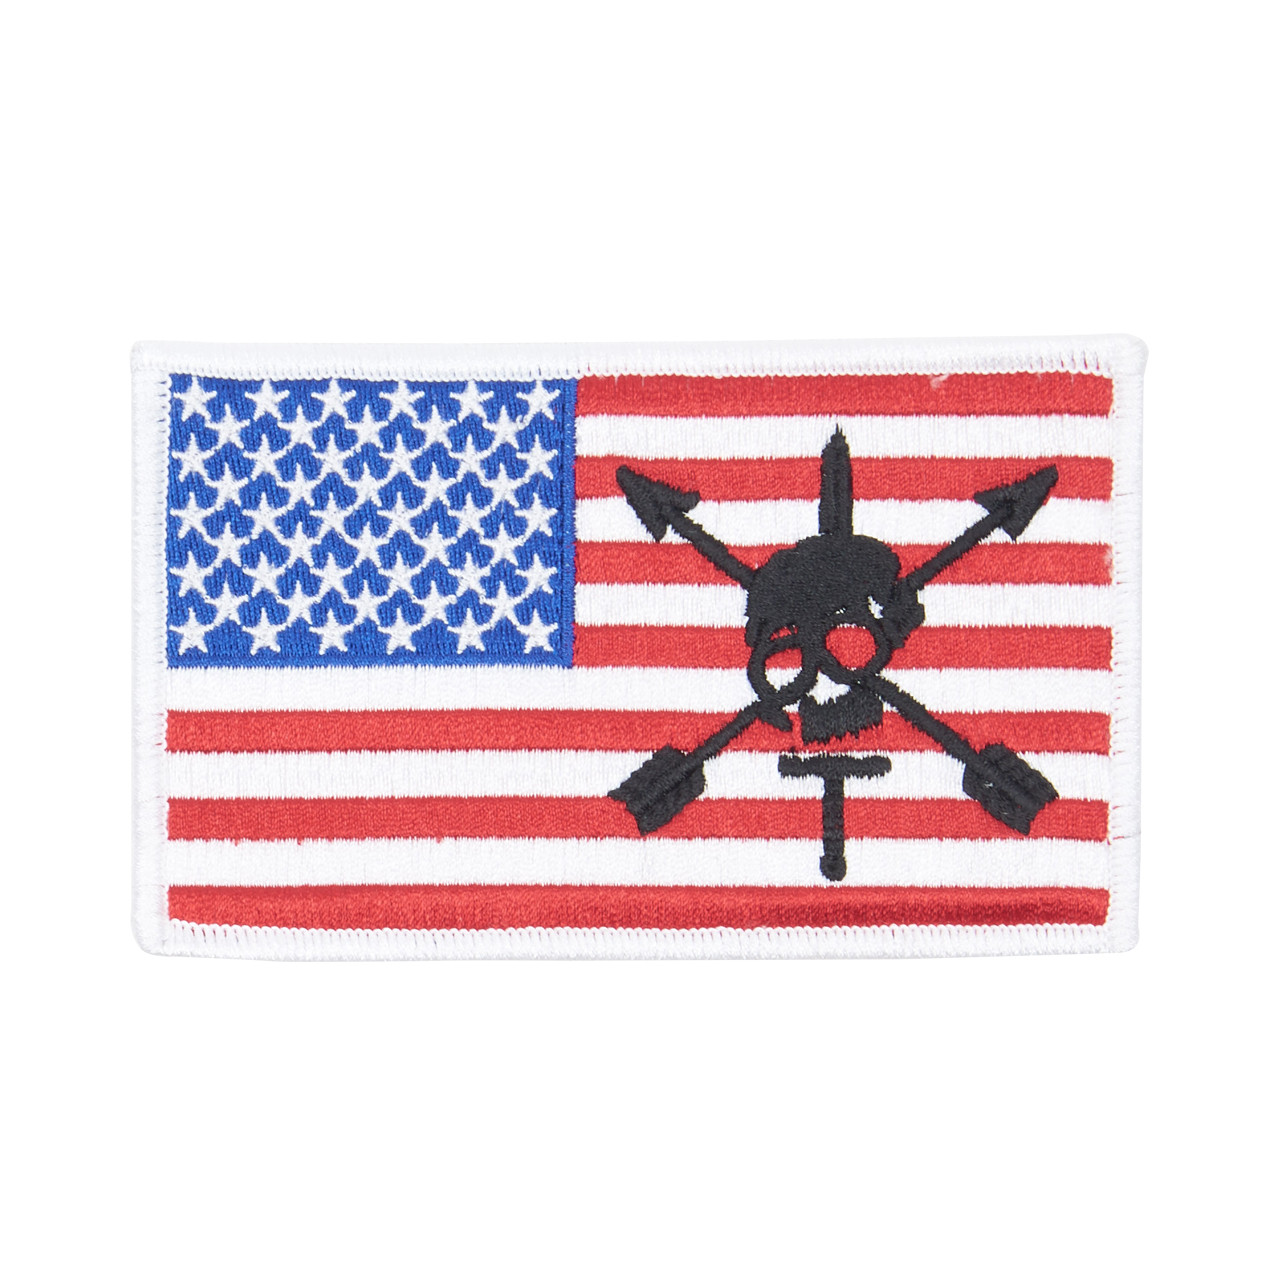 52700 LARGE SPECIAL FORCES FLAG PATCH